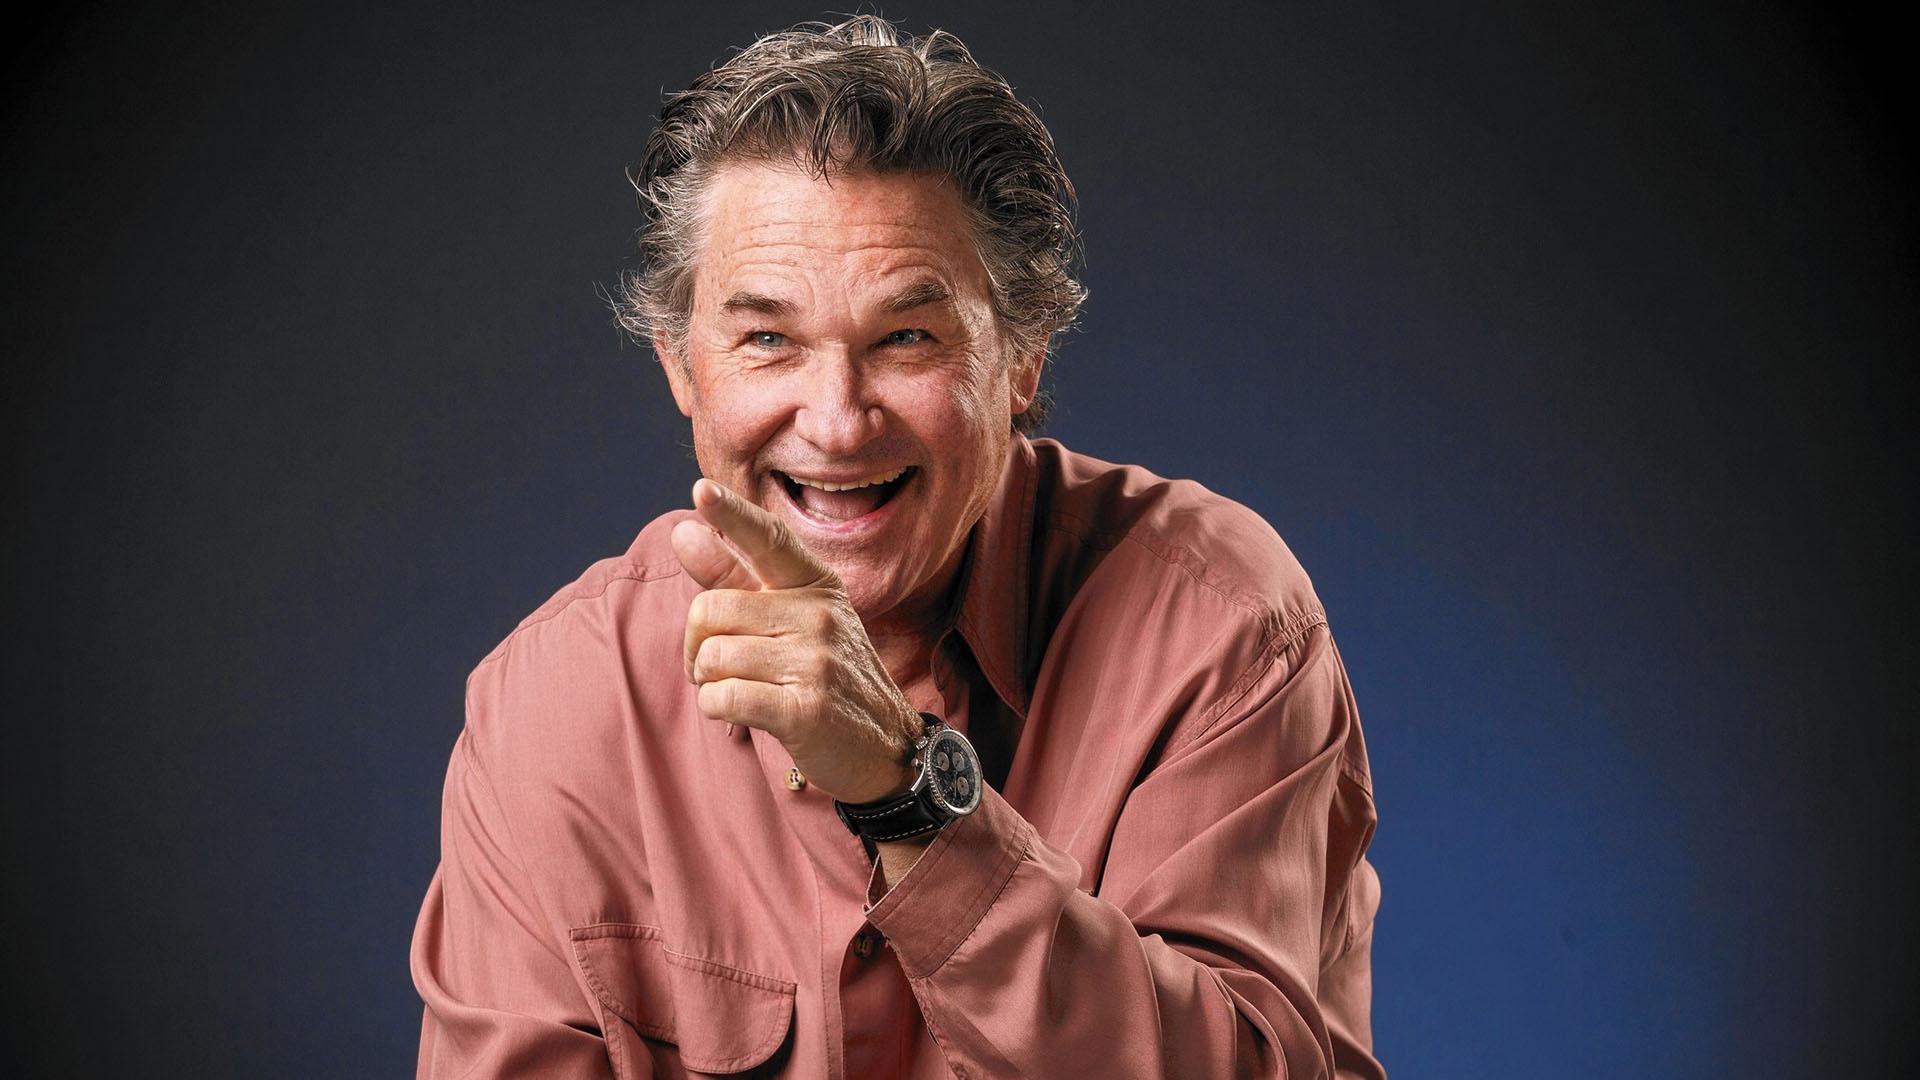 Kurt Russell laughing while pointing his finger